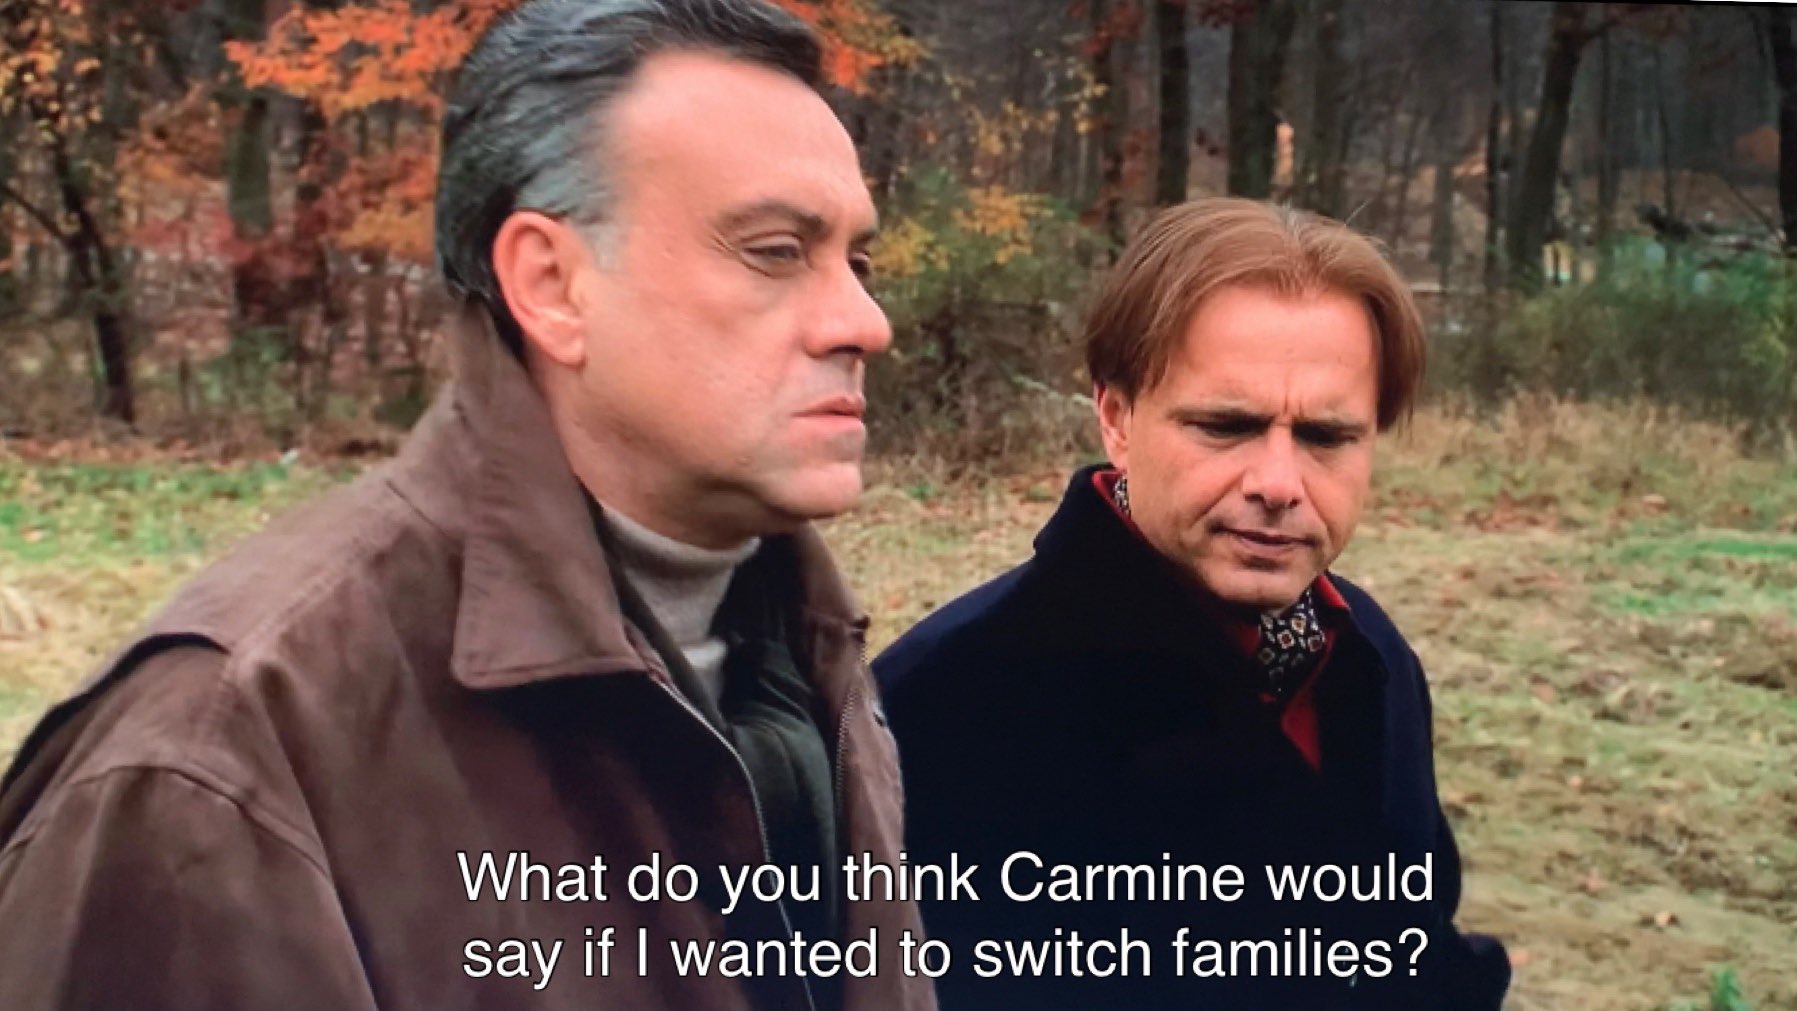 ralph cifaretto asking johnny sack what carmine would say about him switching families.